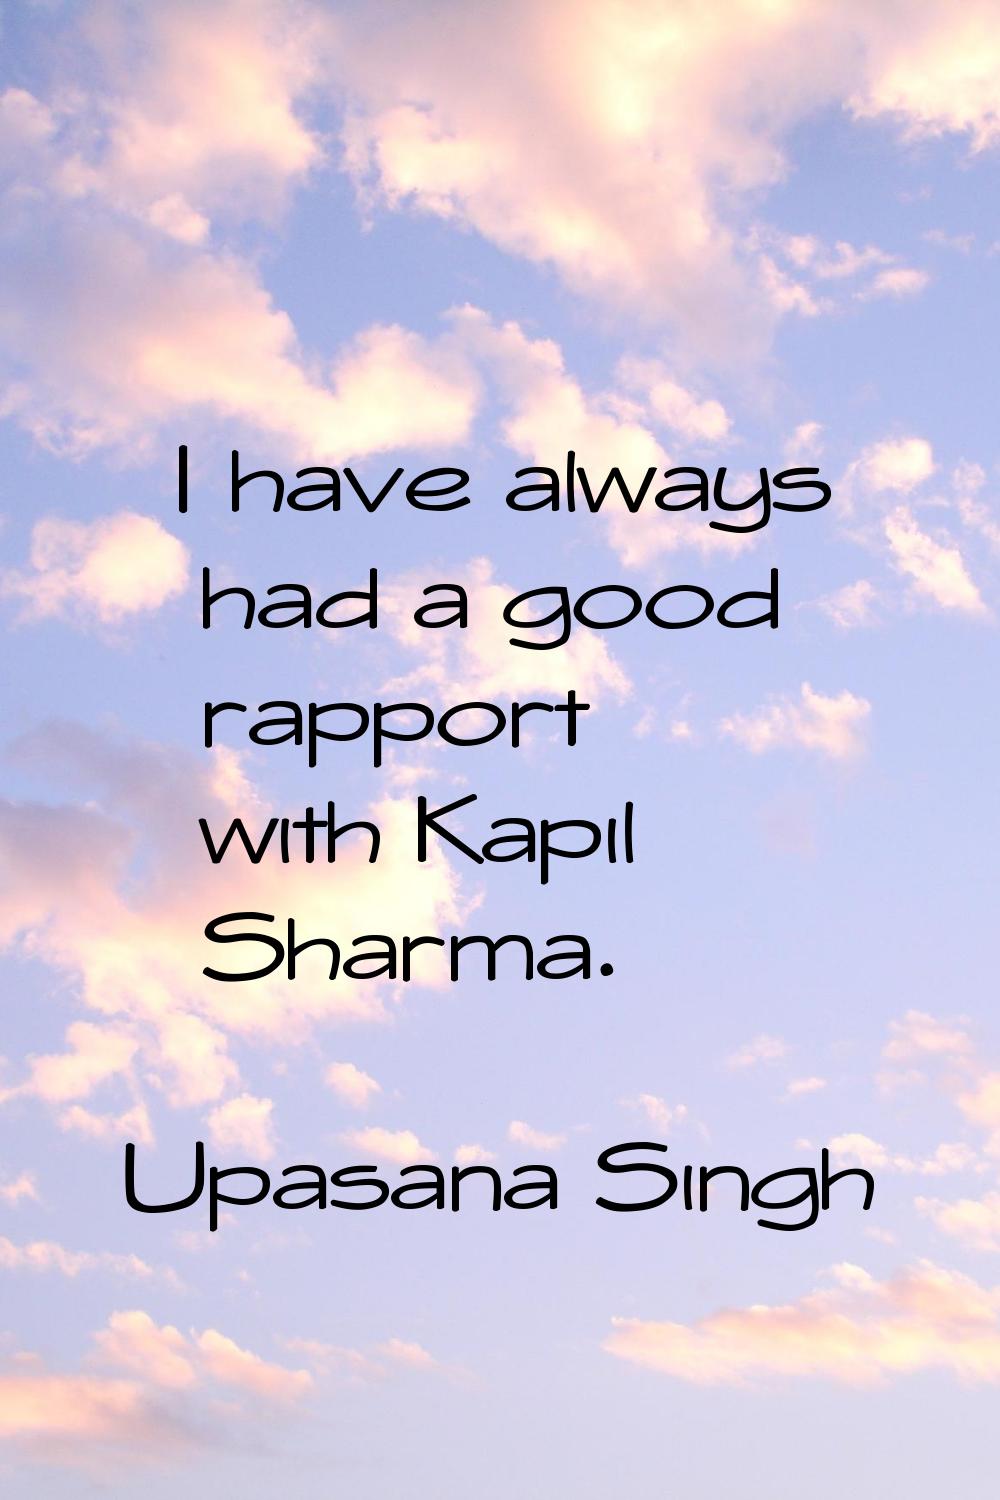 I have always had a good rapport with Kapil Sharma.